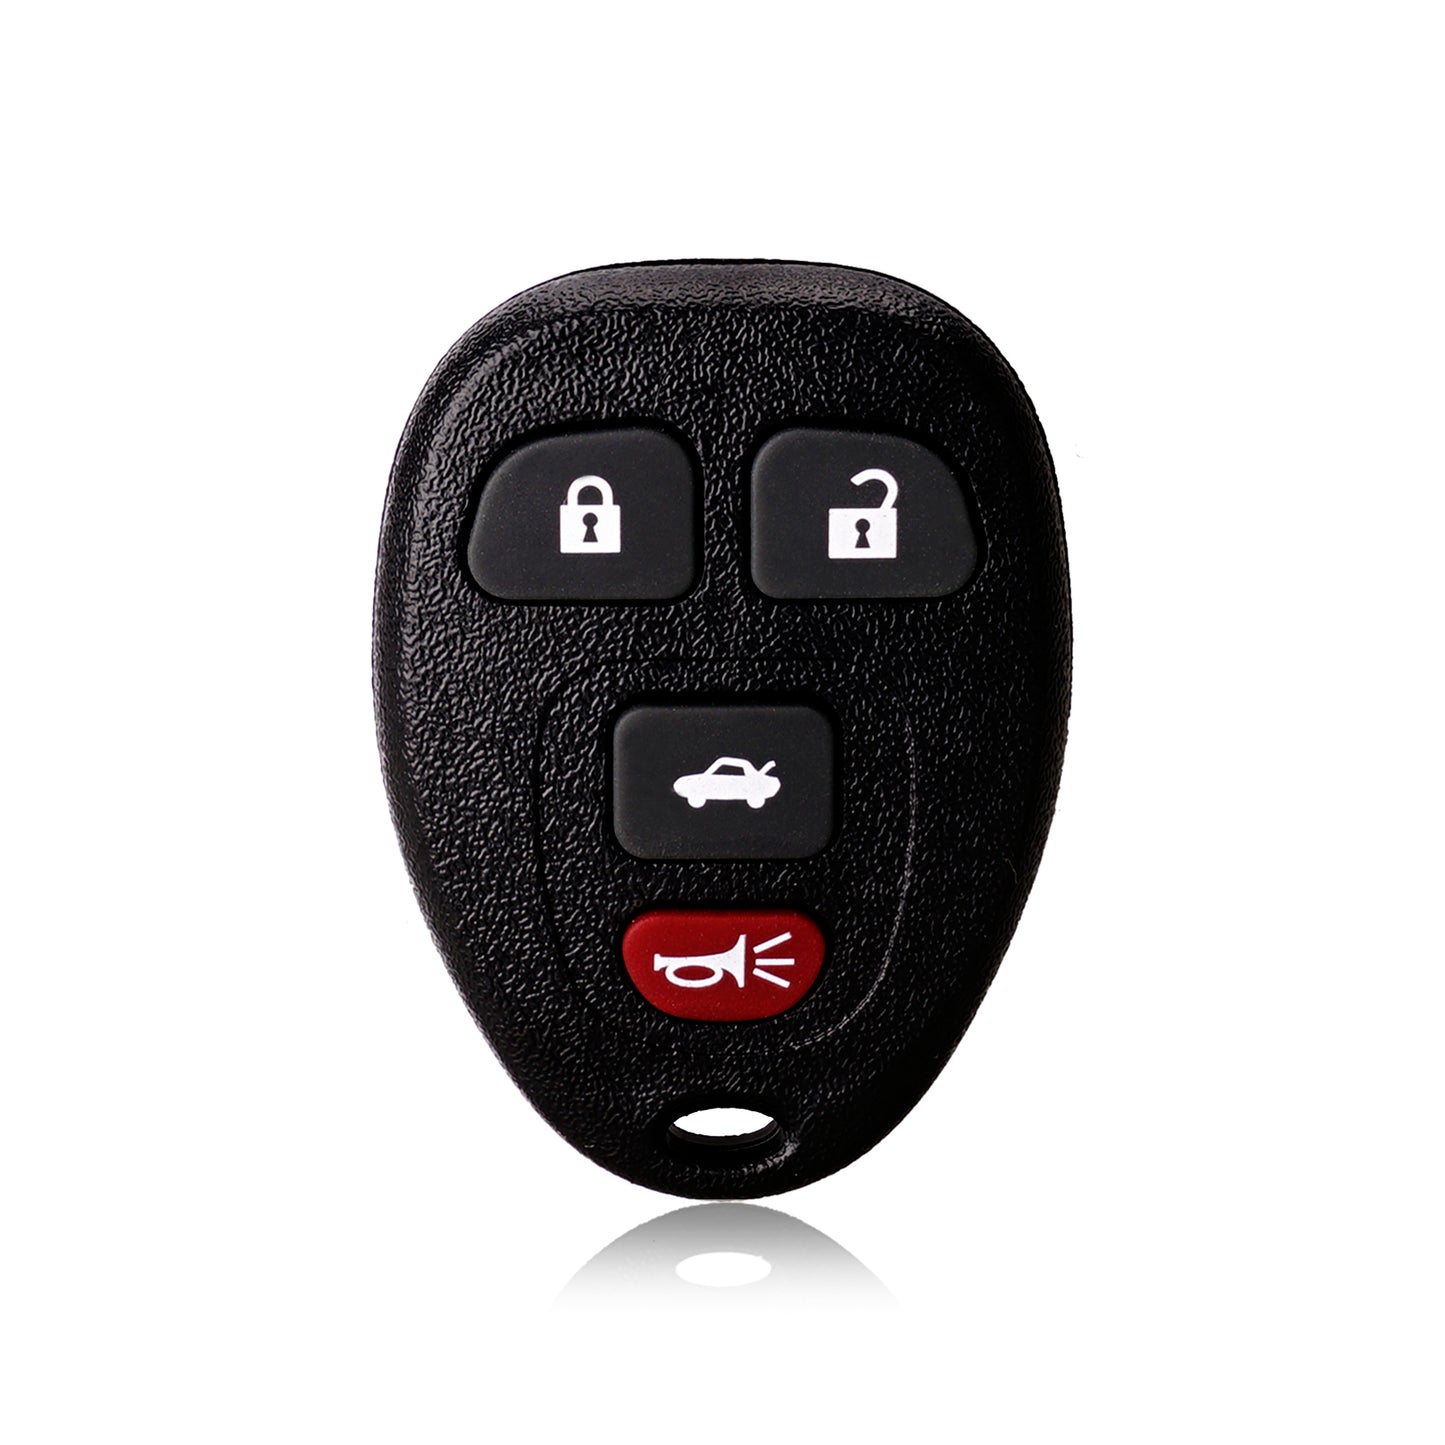 4 Buttons 315MHz Keyless Entry Fob Remote Car Key For Chevrolet Impala Mote Carlo Buick Luceme Cadillac DST Auto Parts SKU : J020